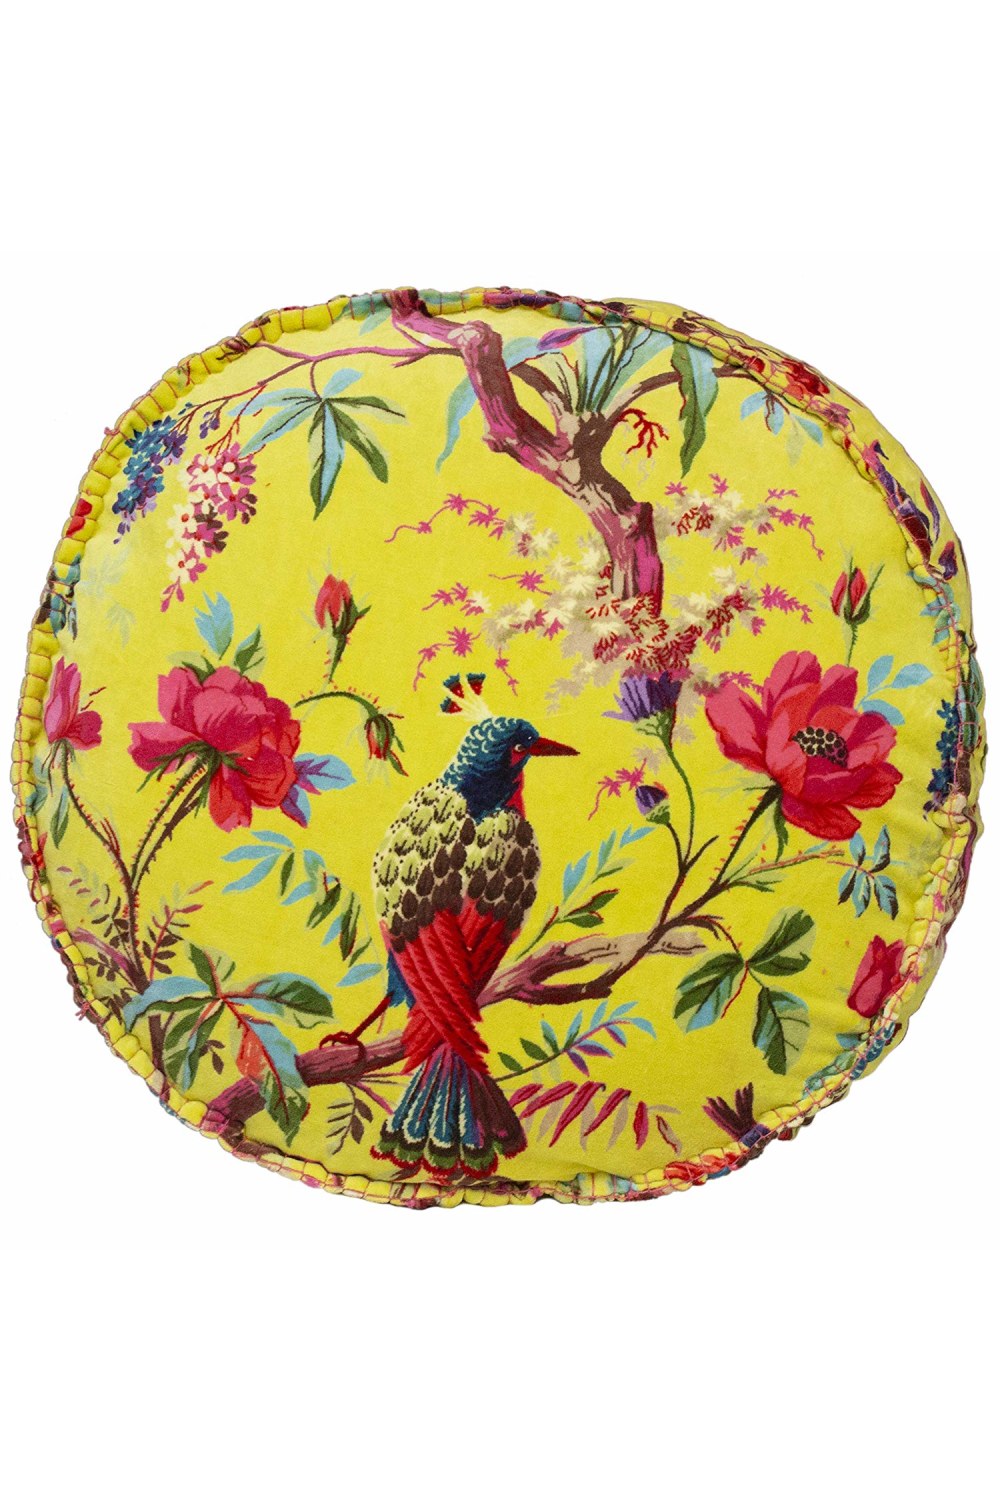 Paoletti Paradise Round Cushion Cover (20 x 20 x 5in)